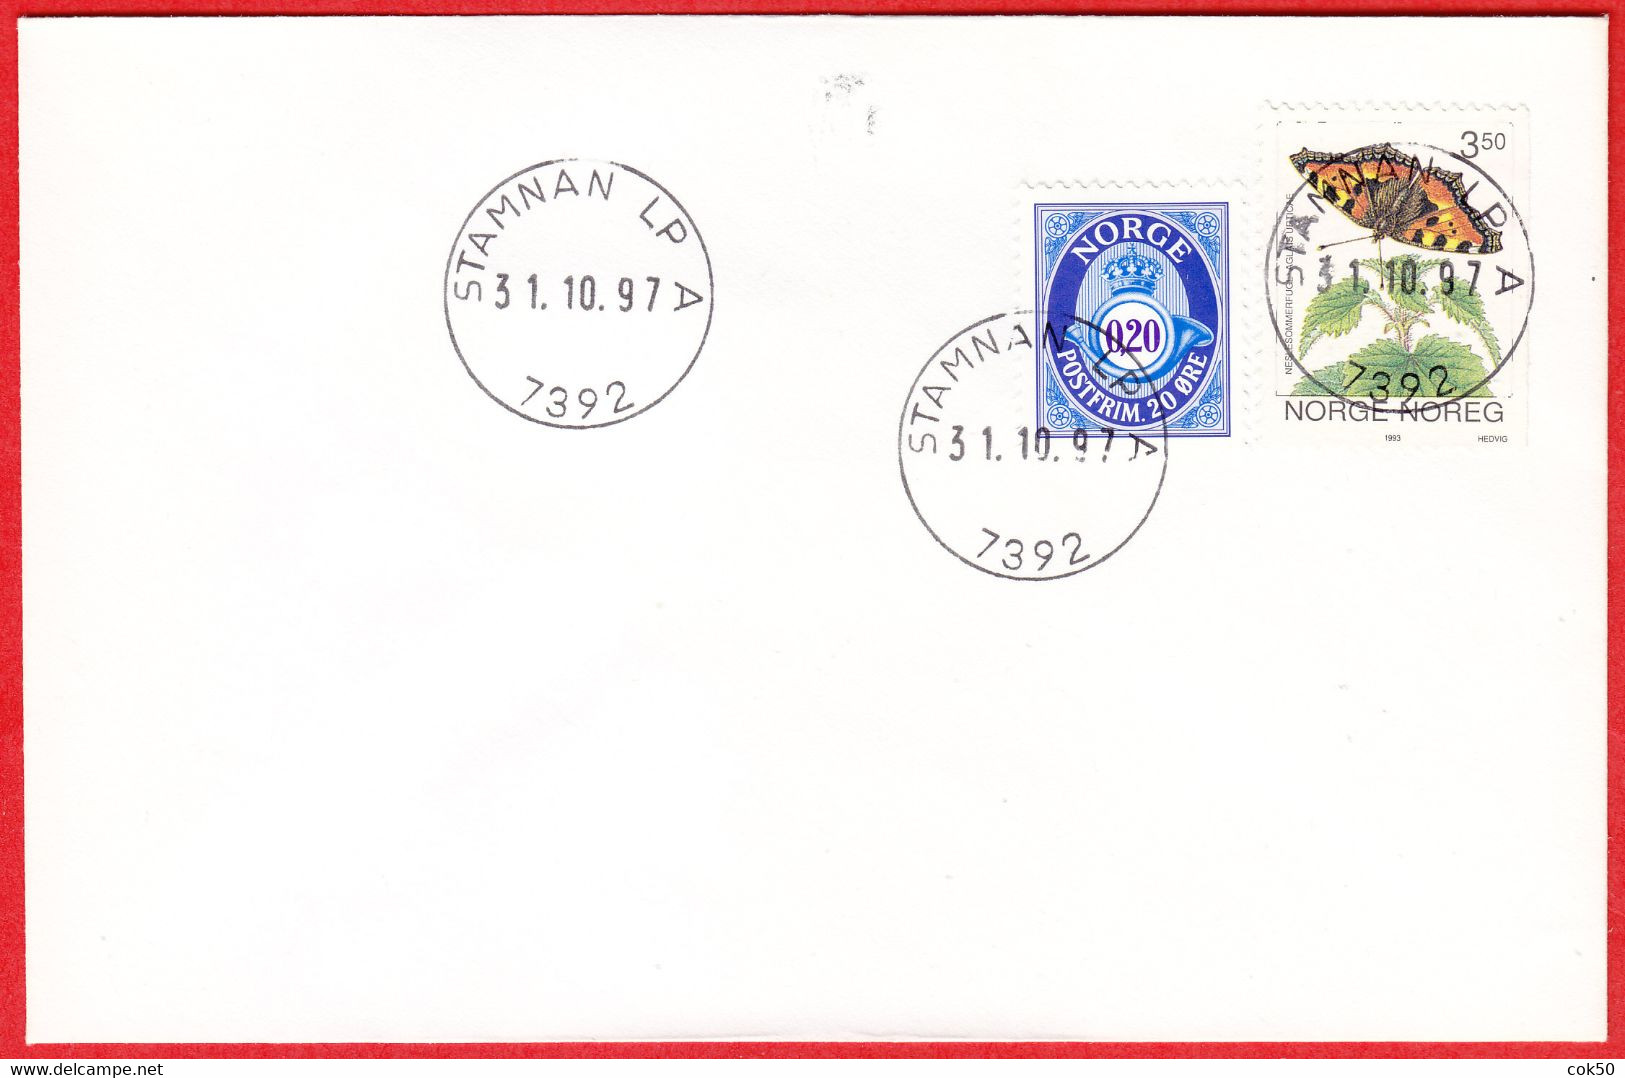 NORWAY -  7392 STAMNAN LP A (Trøndelag County) - Last Day/postoffice Closed On 1997.10.31 - Local Post Stamps